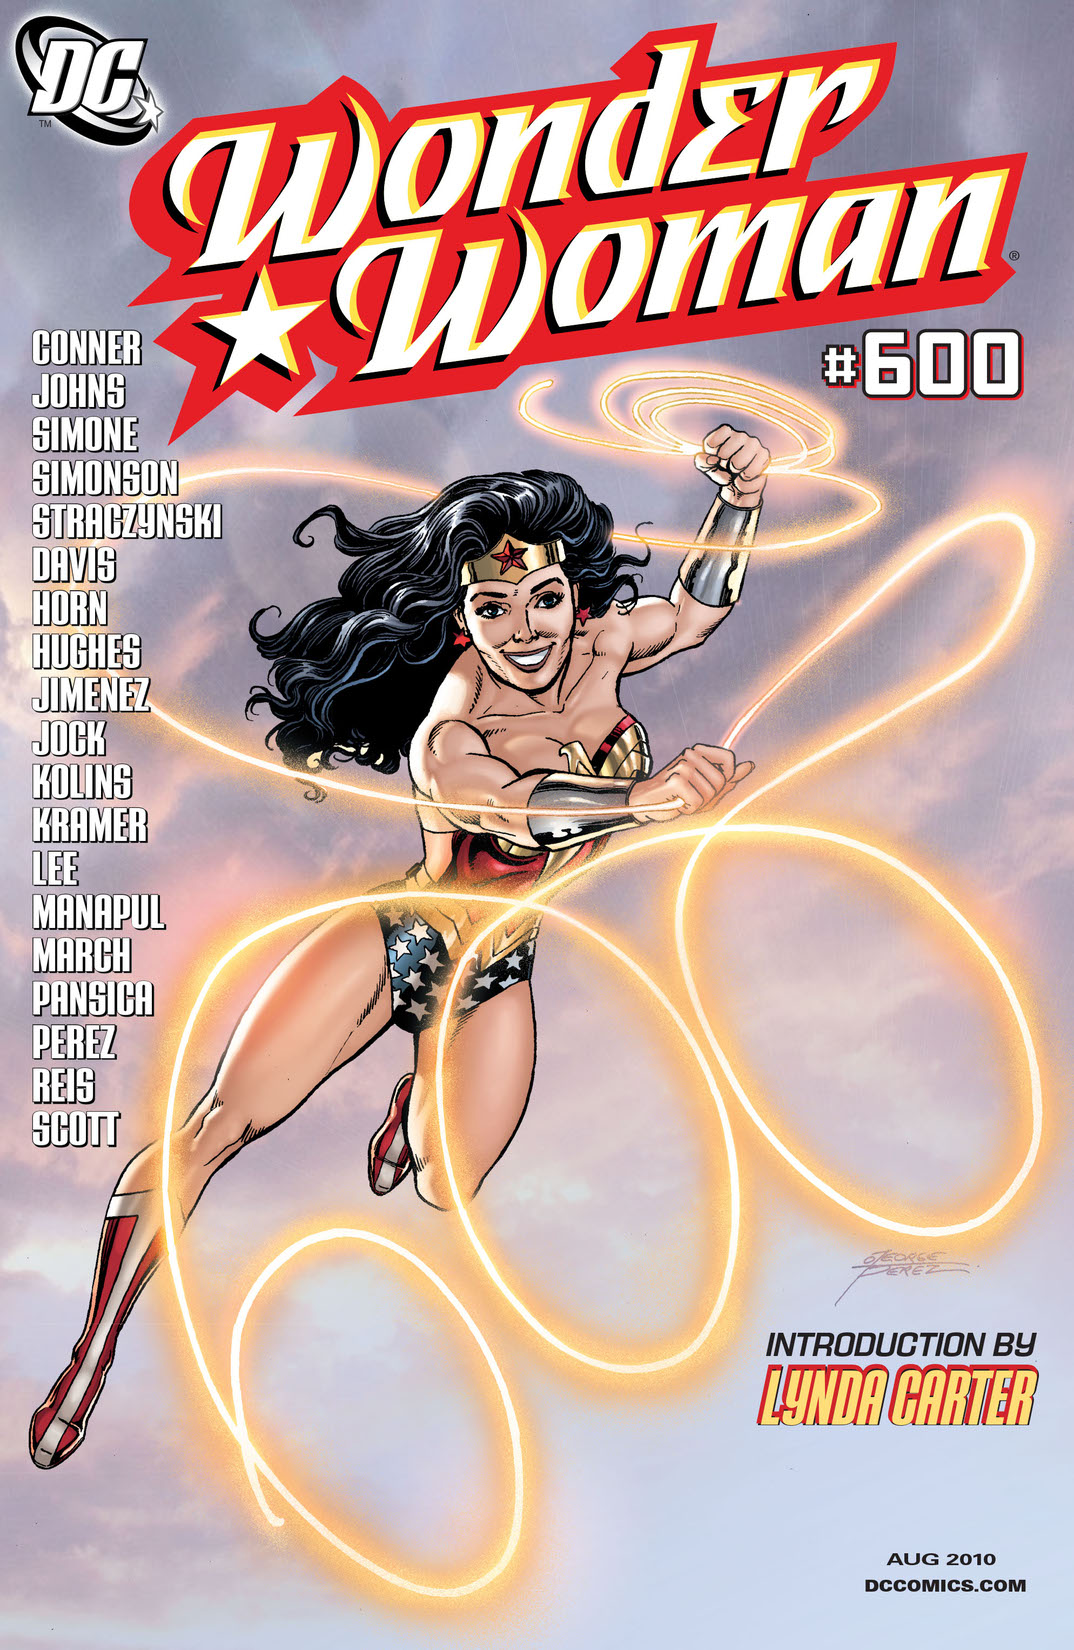 Wonder Woman #600 10-page JMS Story (2010-) #600 preview images